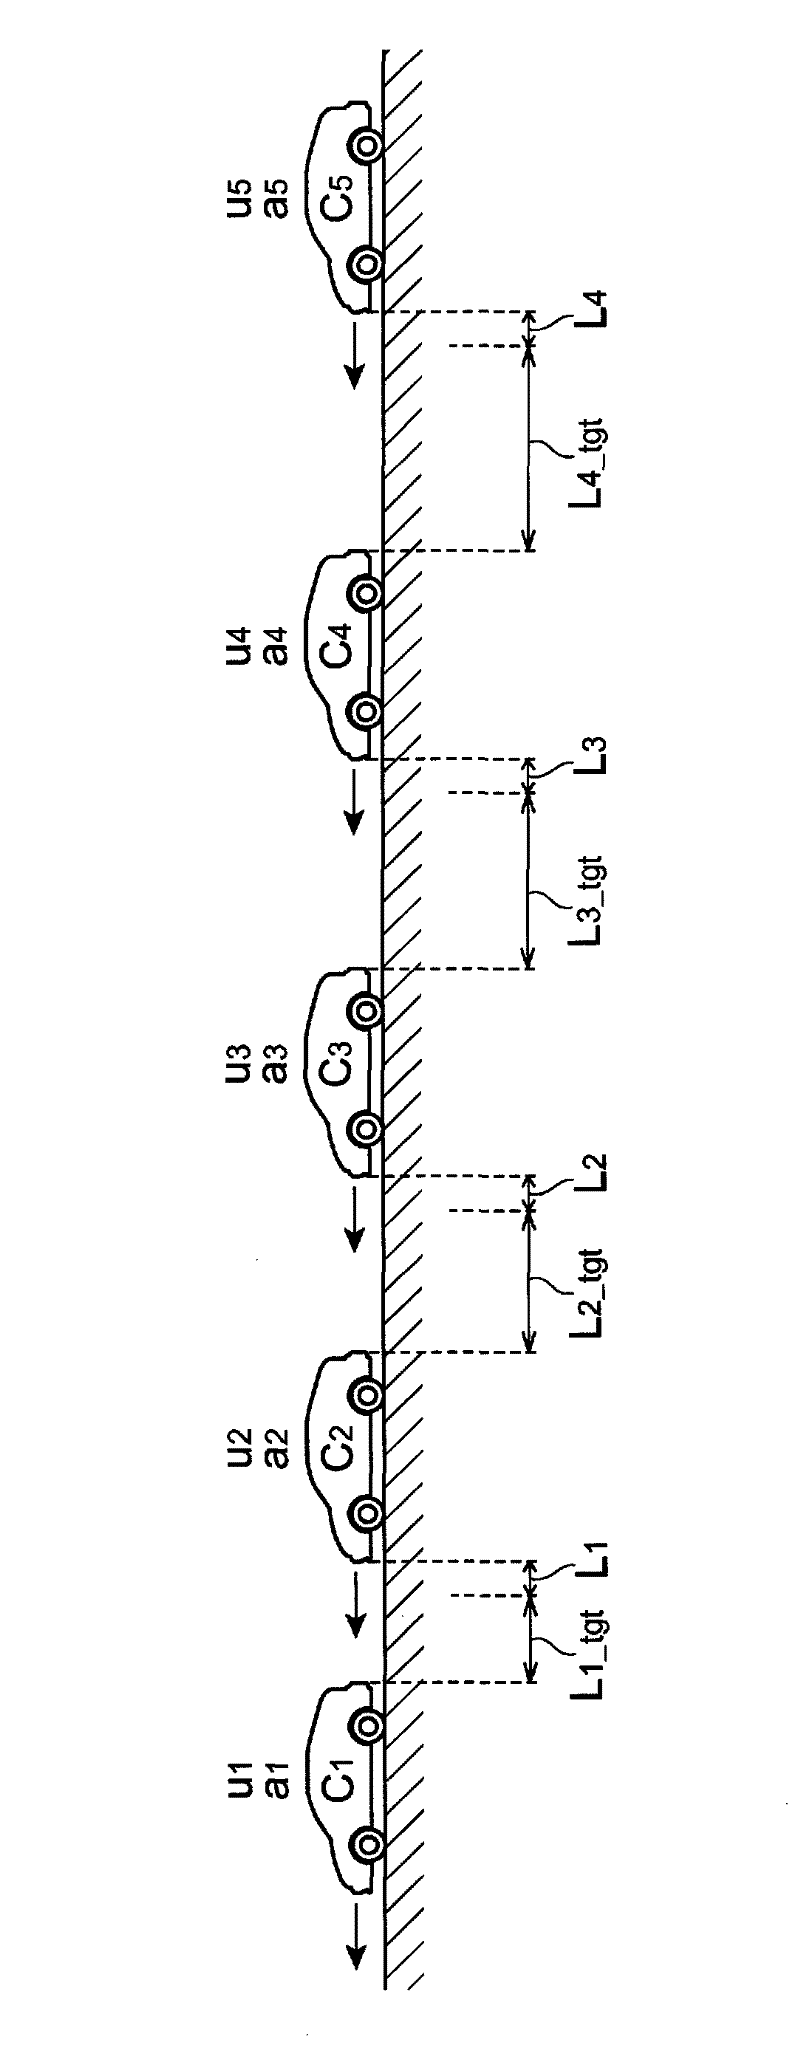 Queuing control system and vehicle